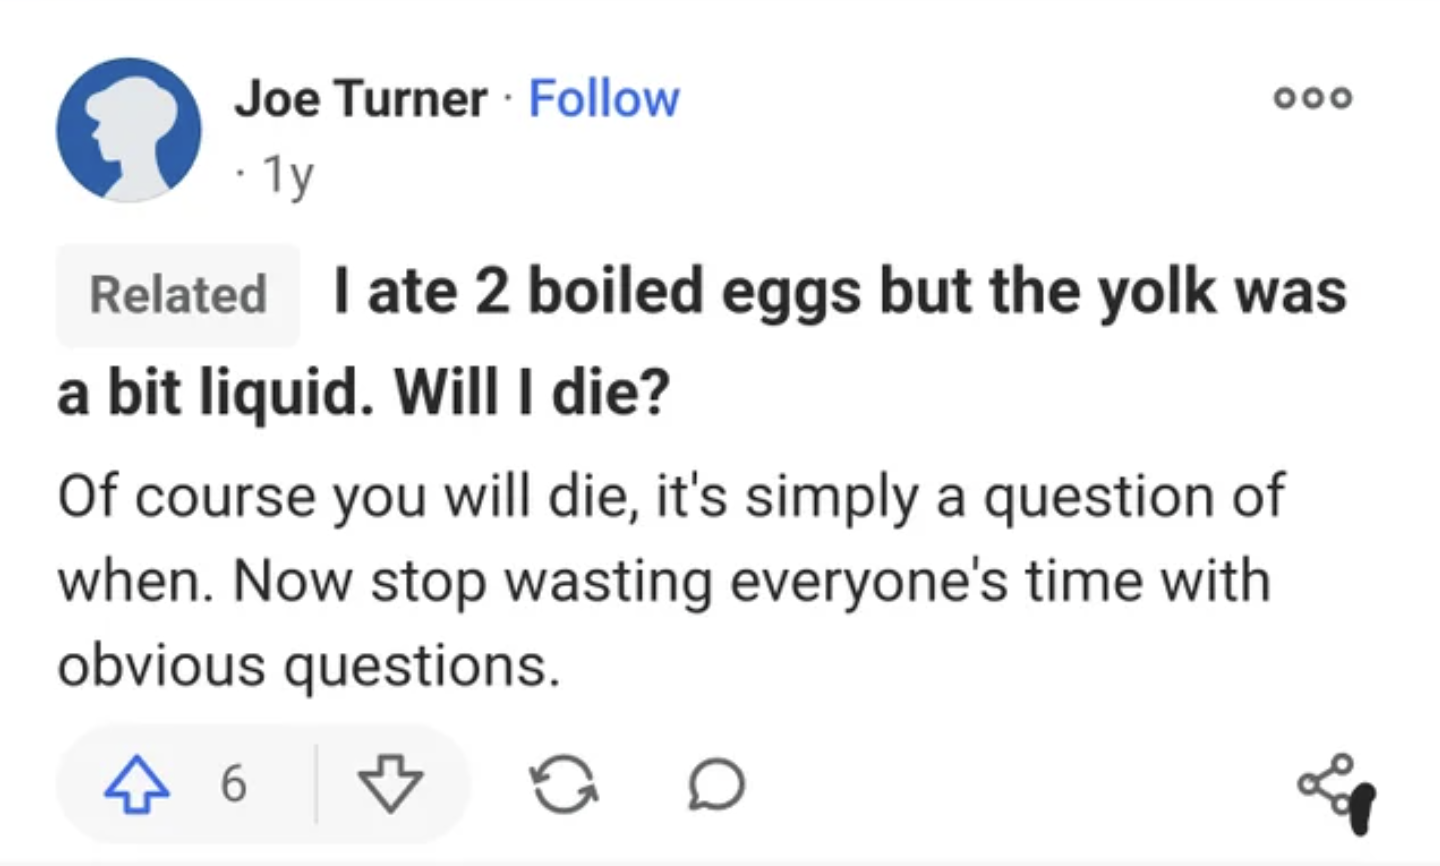 Cursed Comments - I ate 2 boiled eggs but the yolk was a bit liquid. Will I die? Of course you will die, it's simply a question of when. Now stop wasting everyone's time with obvious questions.